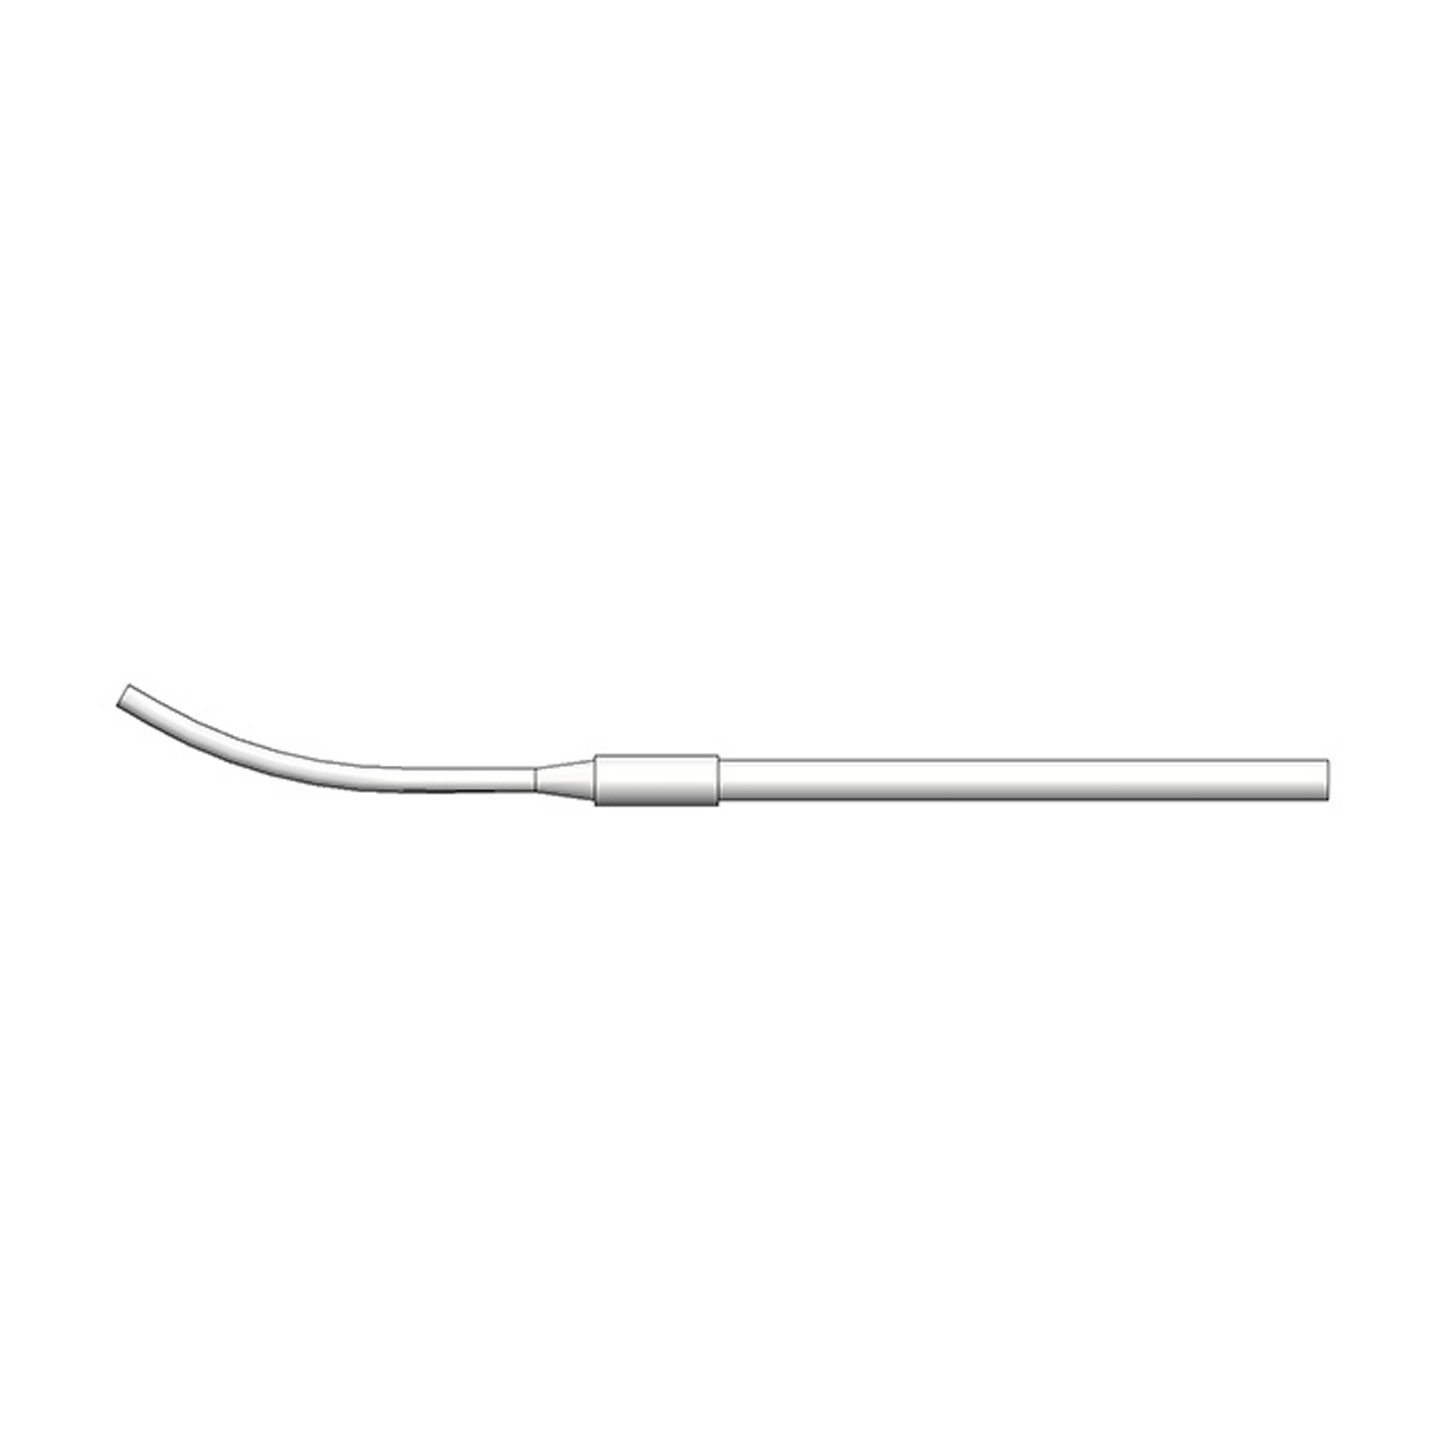 Hakko Products_ B5271 Feed pipe assembly 1.2mm_ Soldering Accessories_ Hakko Products